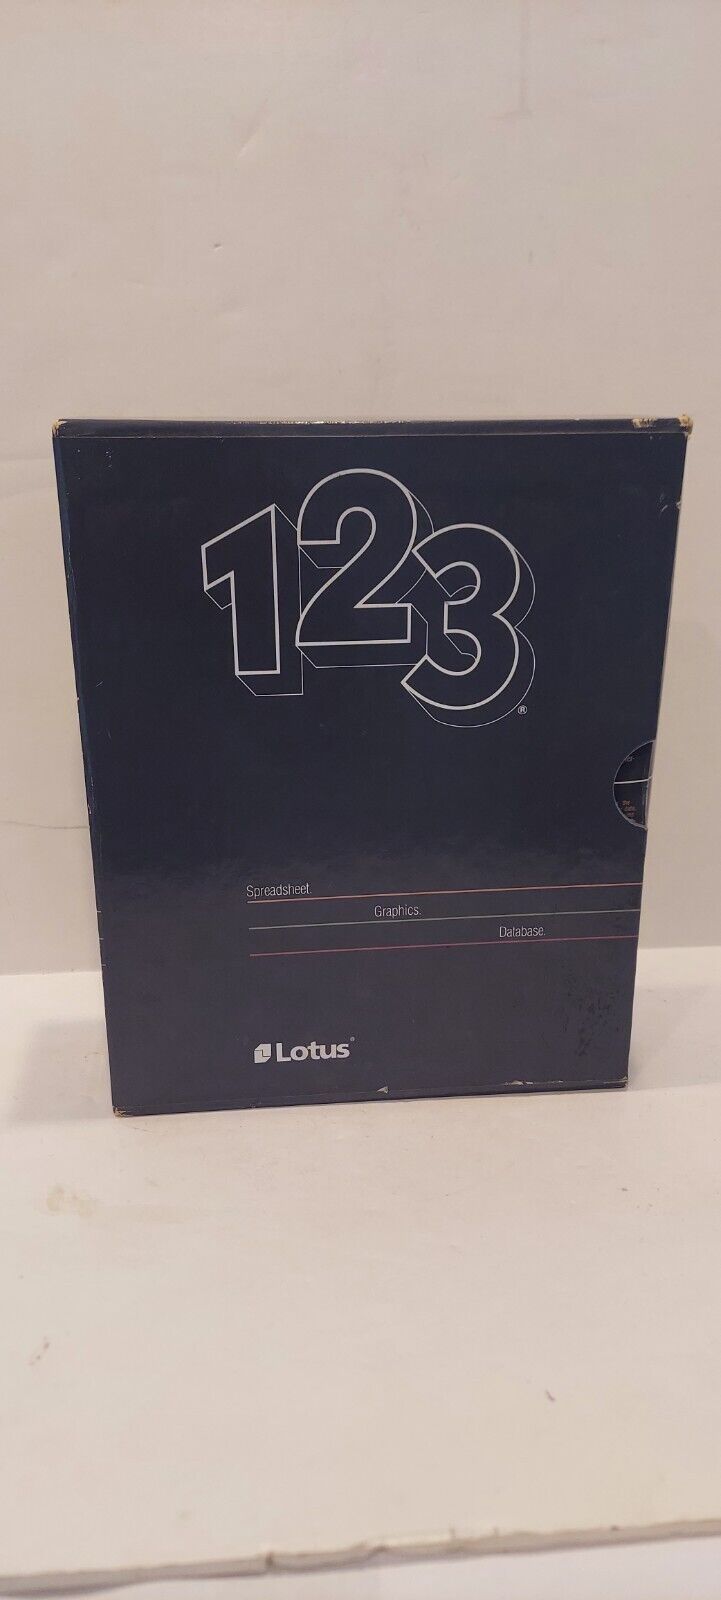 Lotus 123 software for IBM Compaq AT&T Version w/ Manual & Disks, Release 2.01 